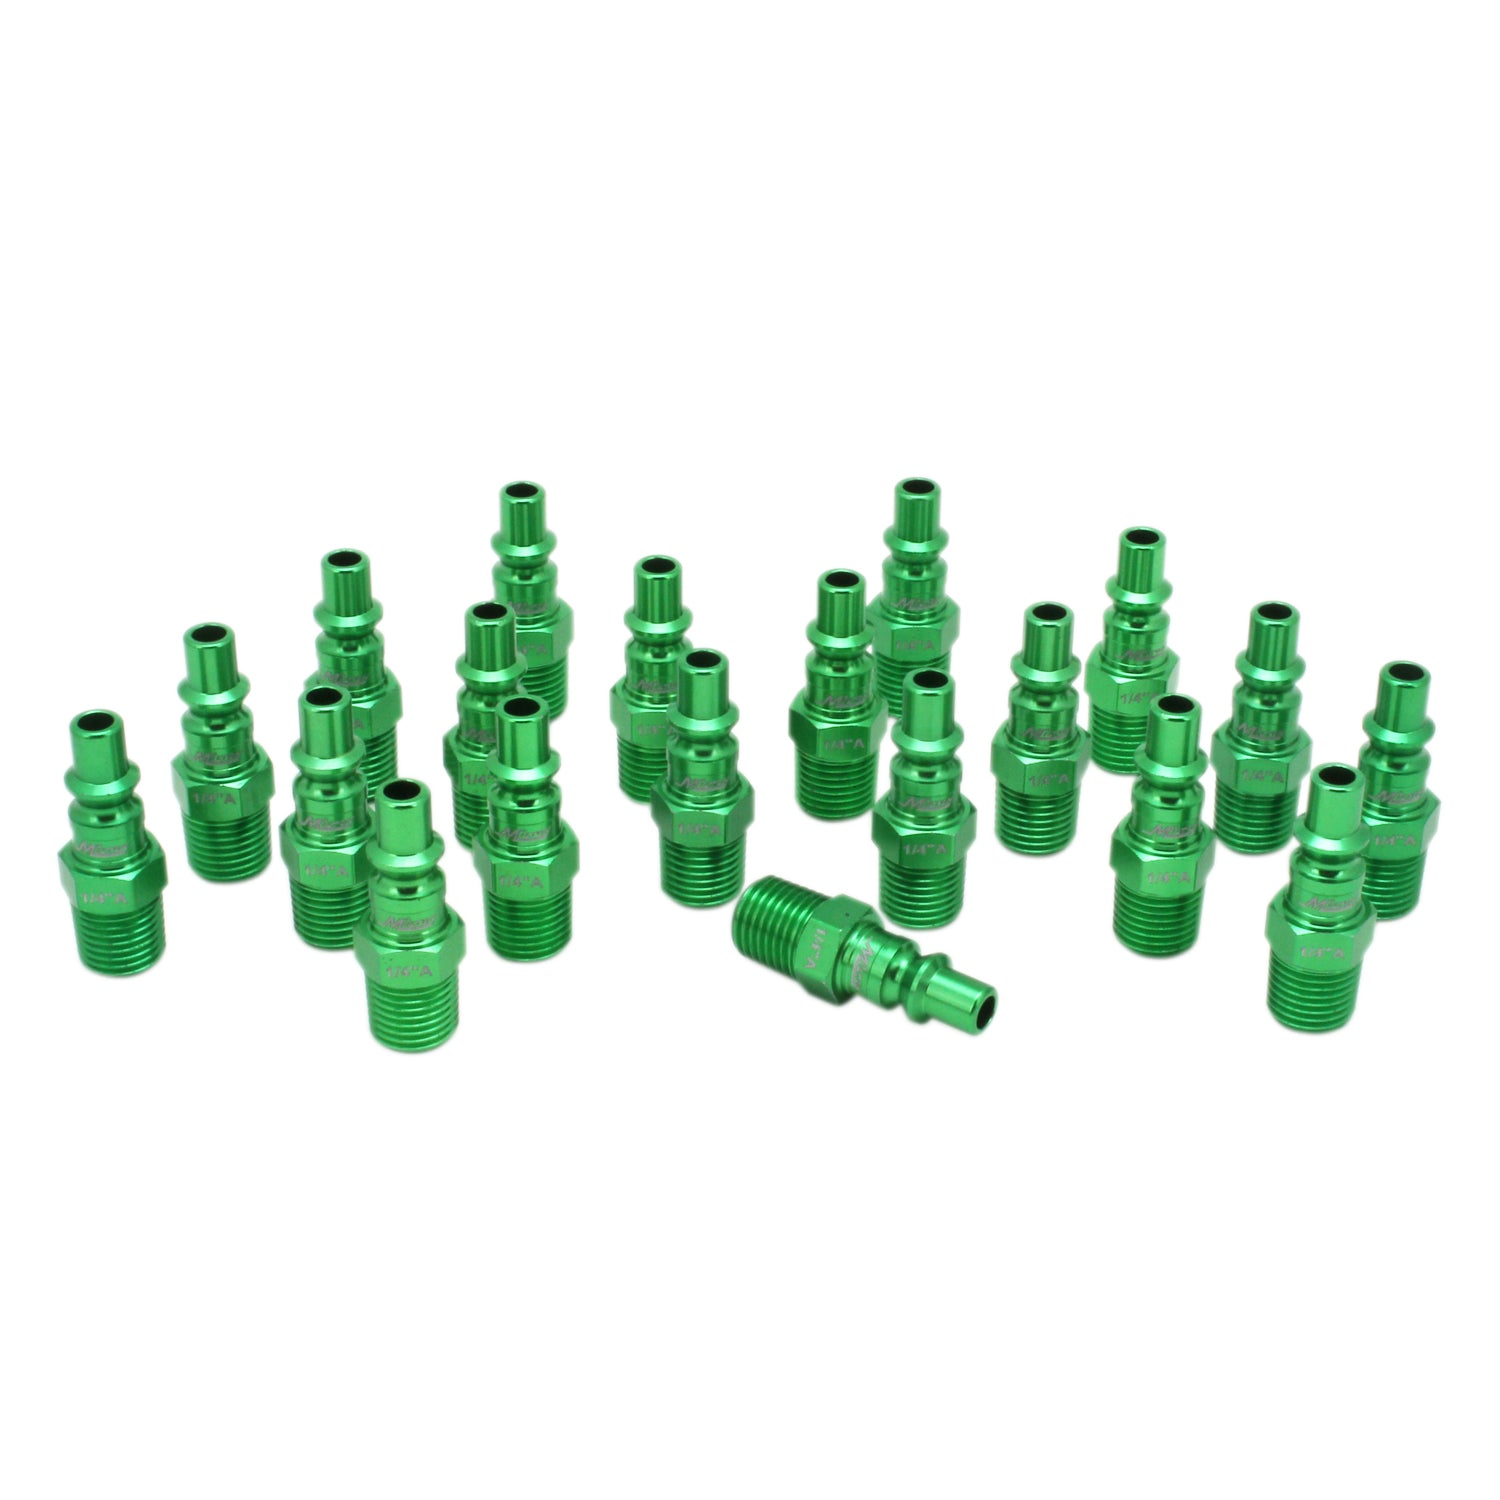 COLORFIT® Plugs (A-Style, Green) - 1/4